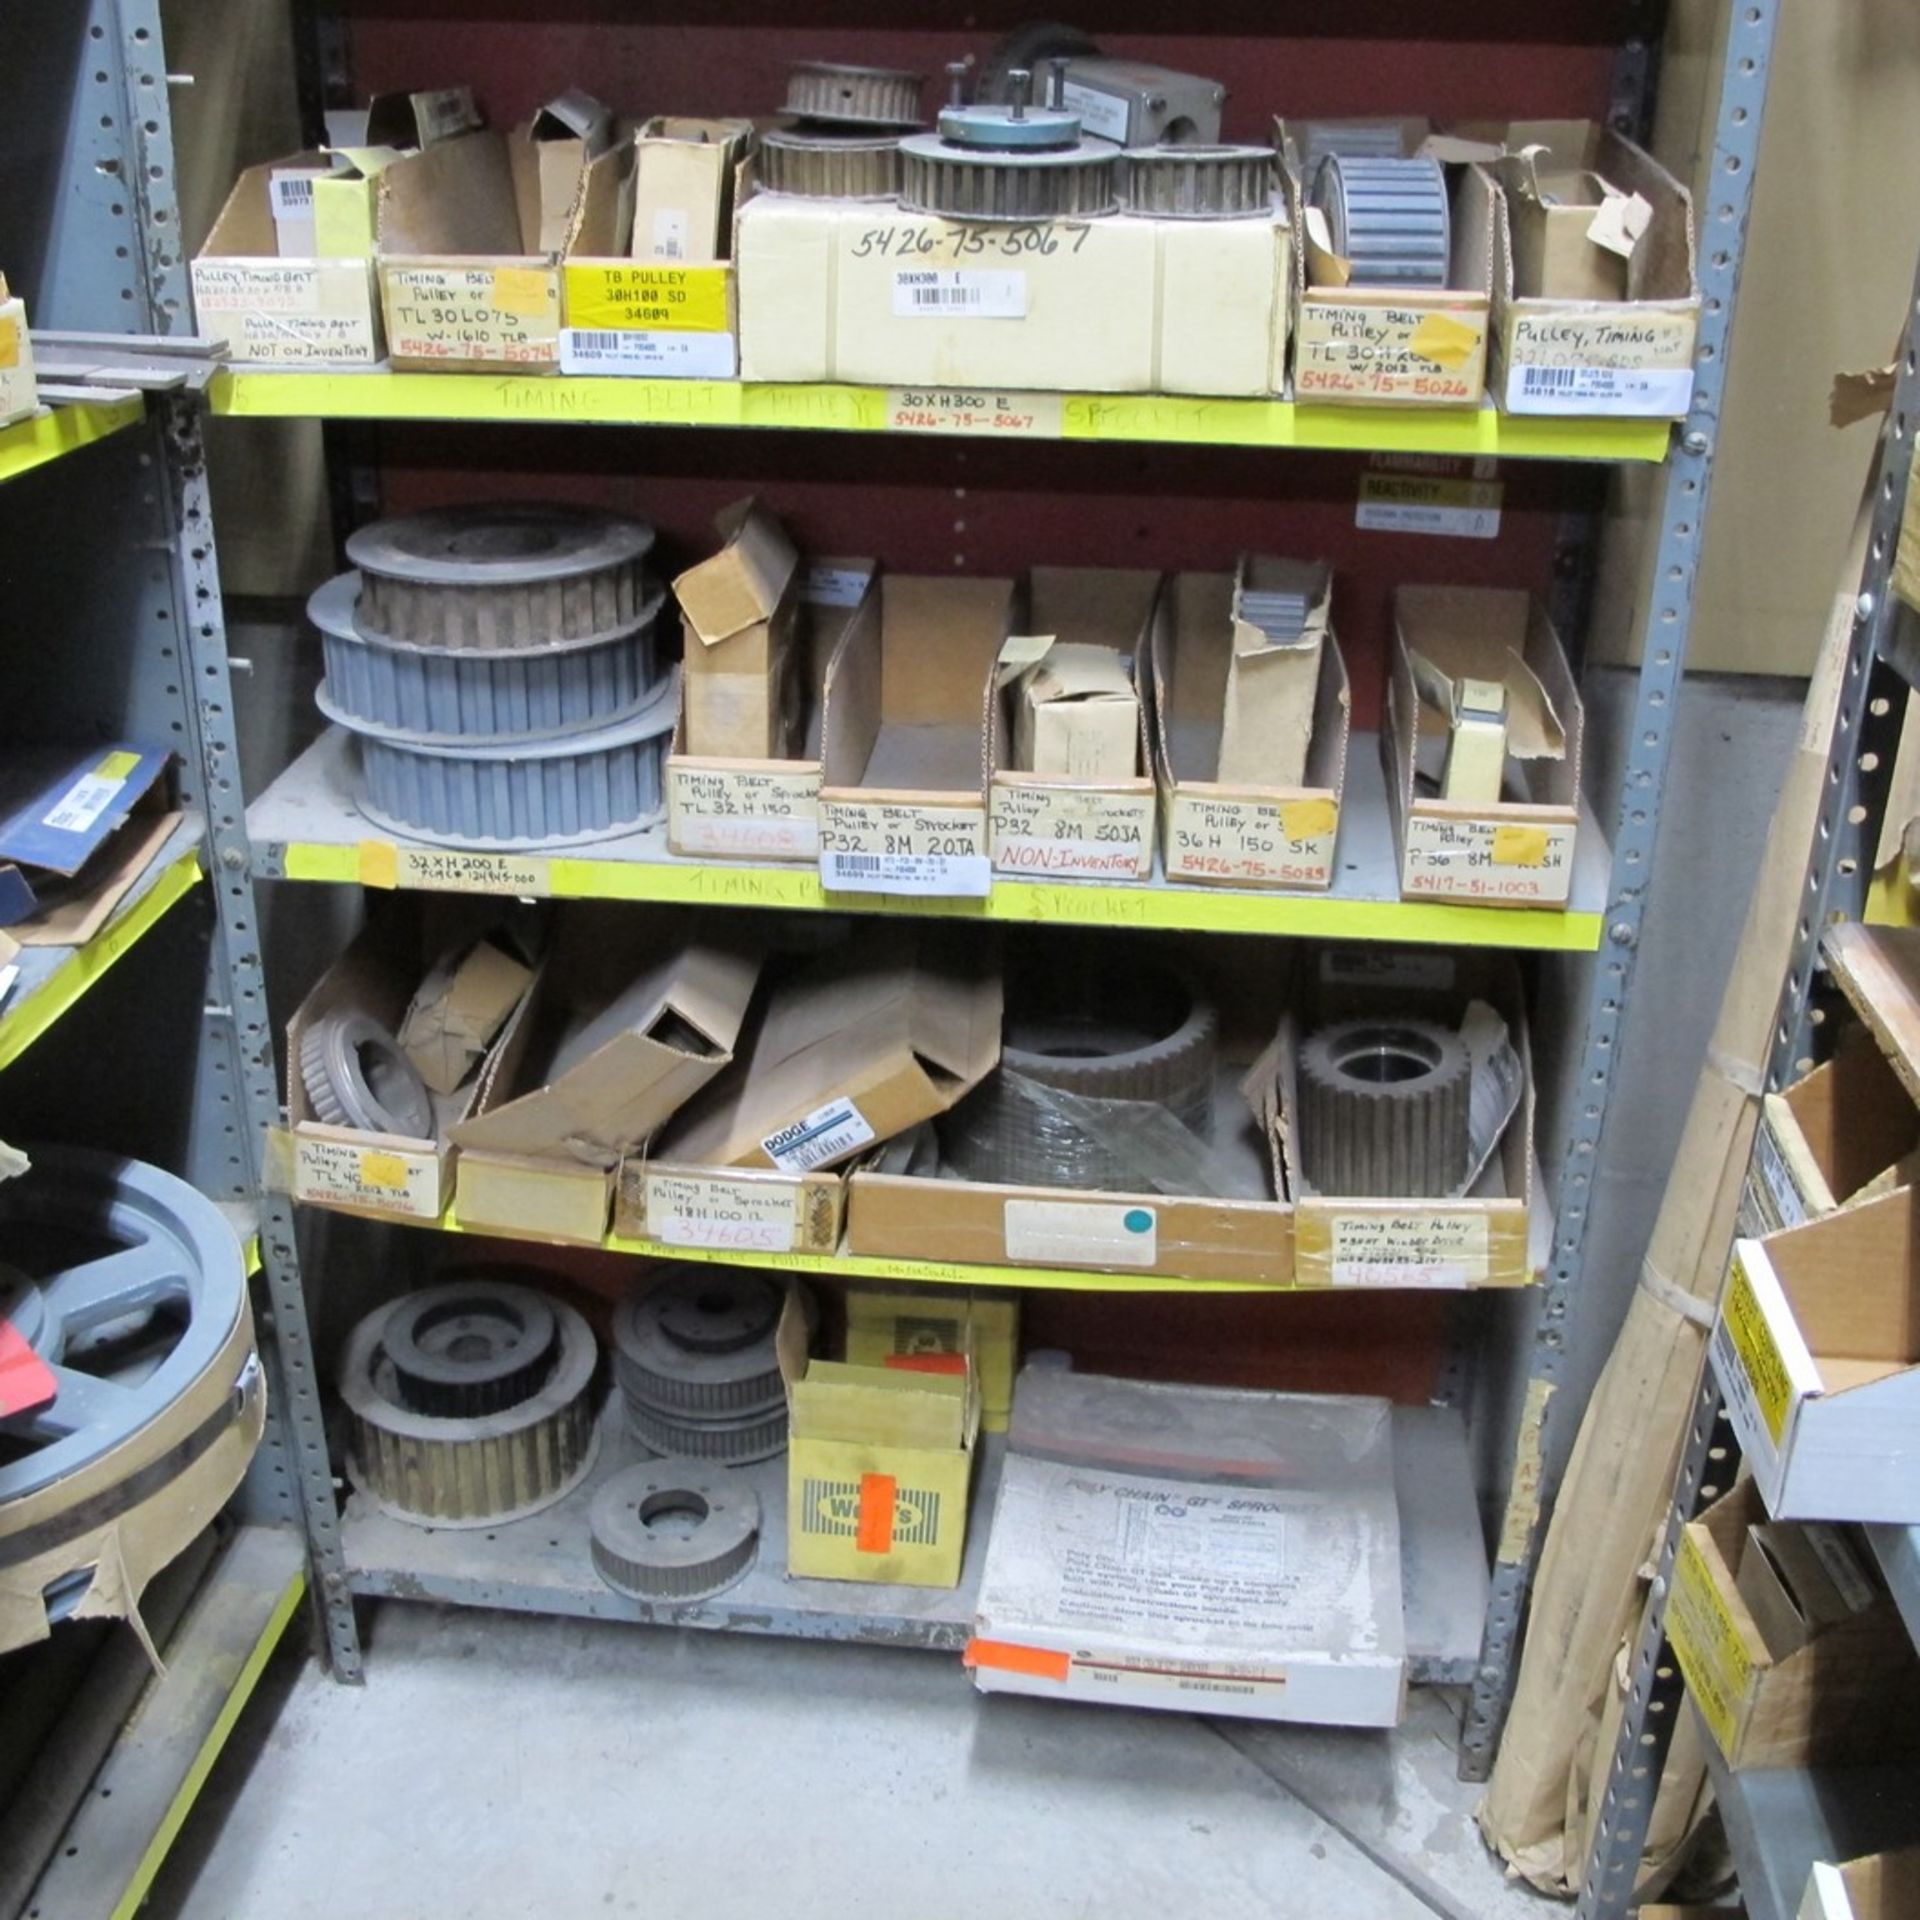 LOT OF ASST. PULLIES, TIMING BELTS, PRINTER PARTS, CLEANER, WRAPPER PARTS W/ (4) SECTIONS OF RACKING - Image 12 of 12